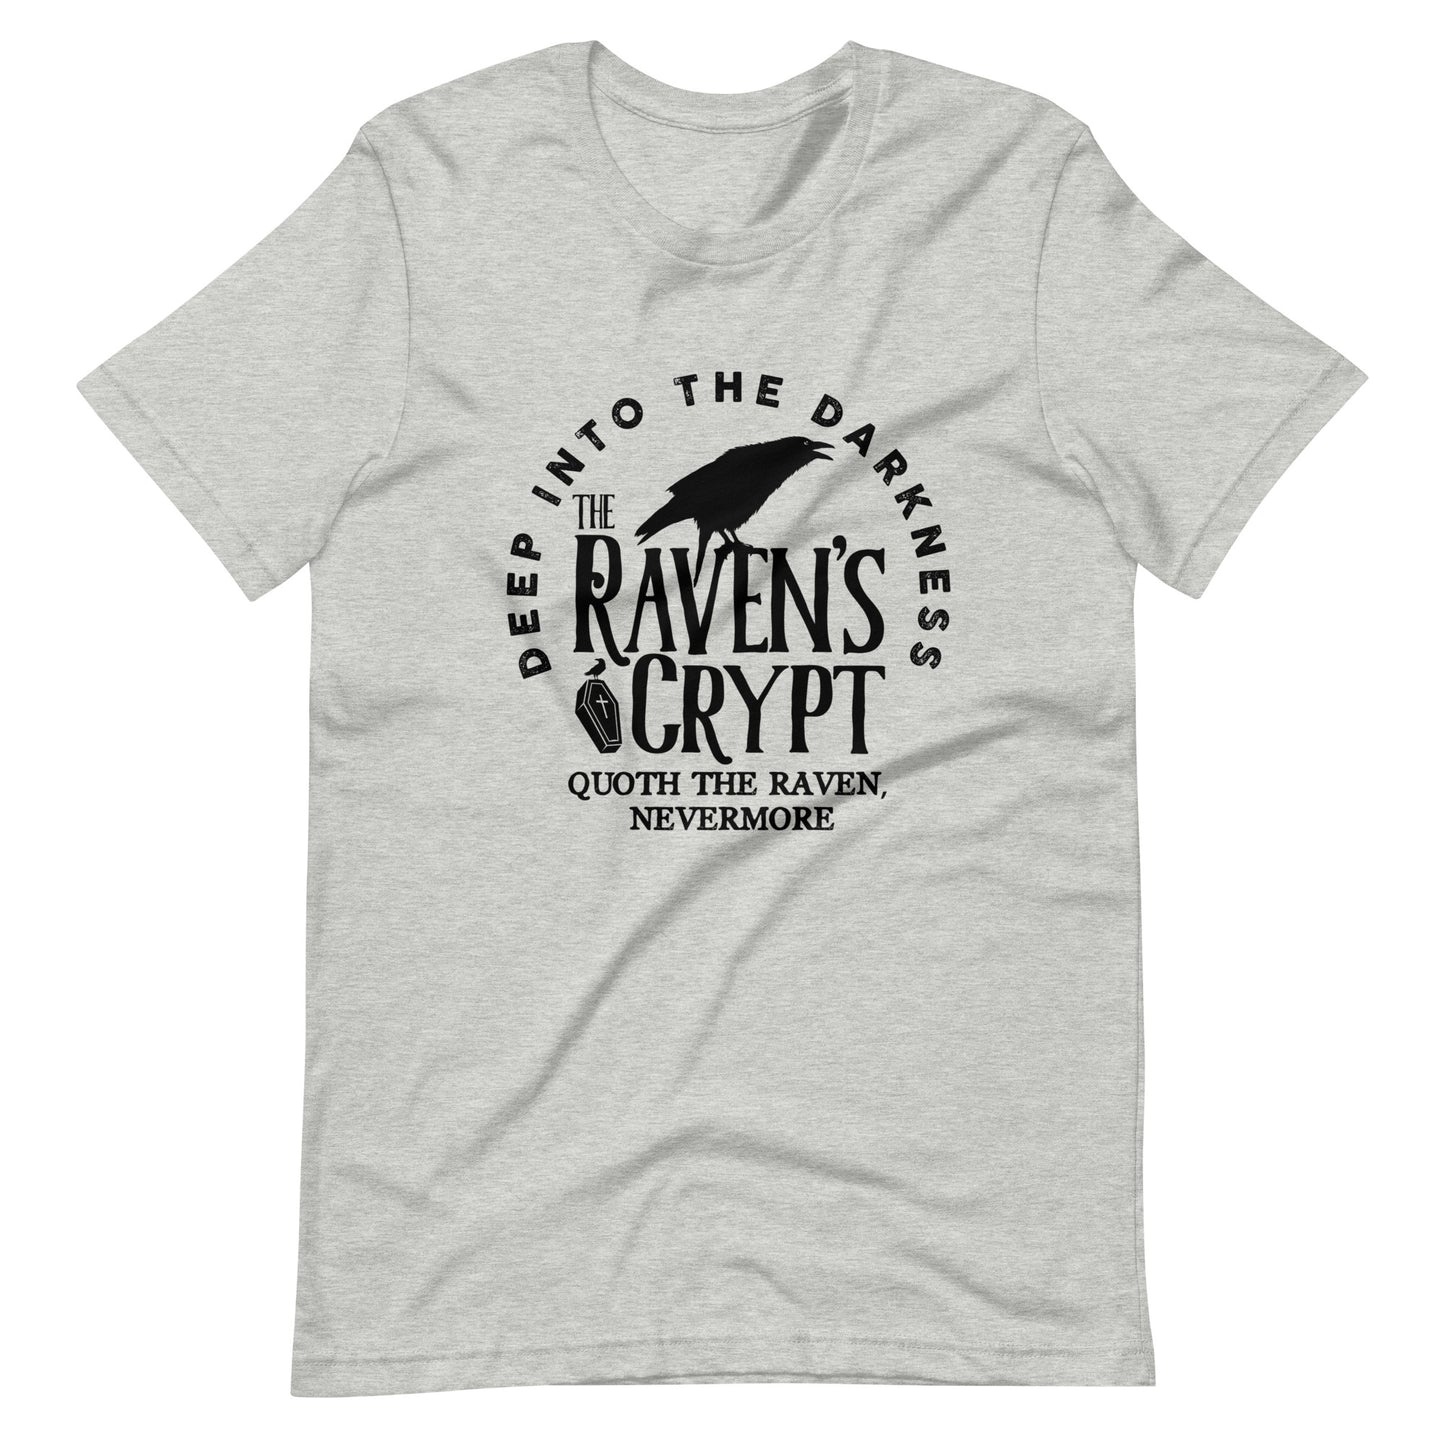 Deep Into the Darkness The Raven's Crypt - Men's t-shirt - Athletic Heather Front